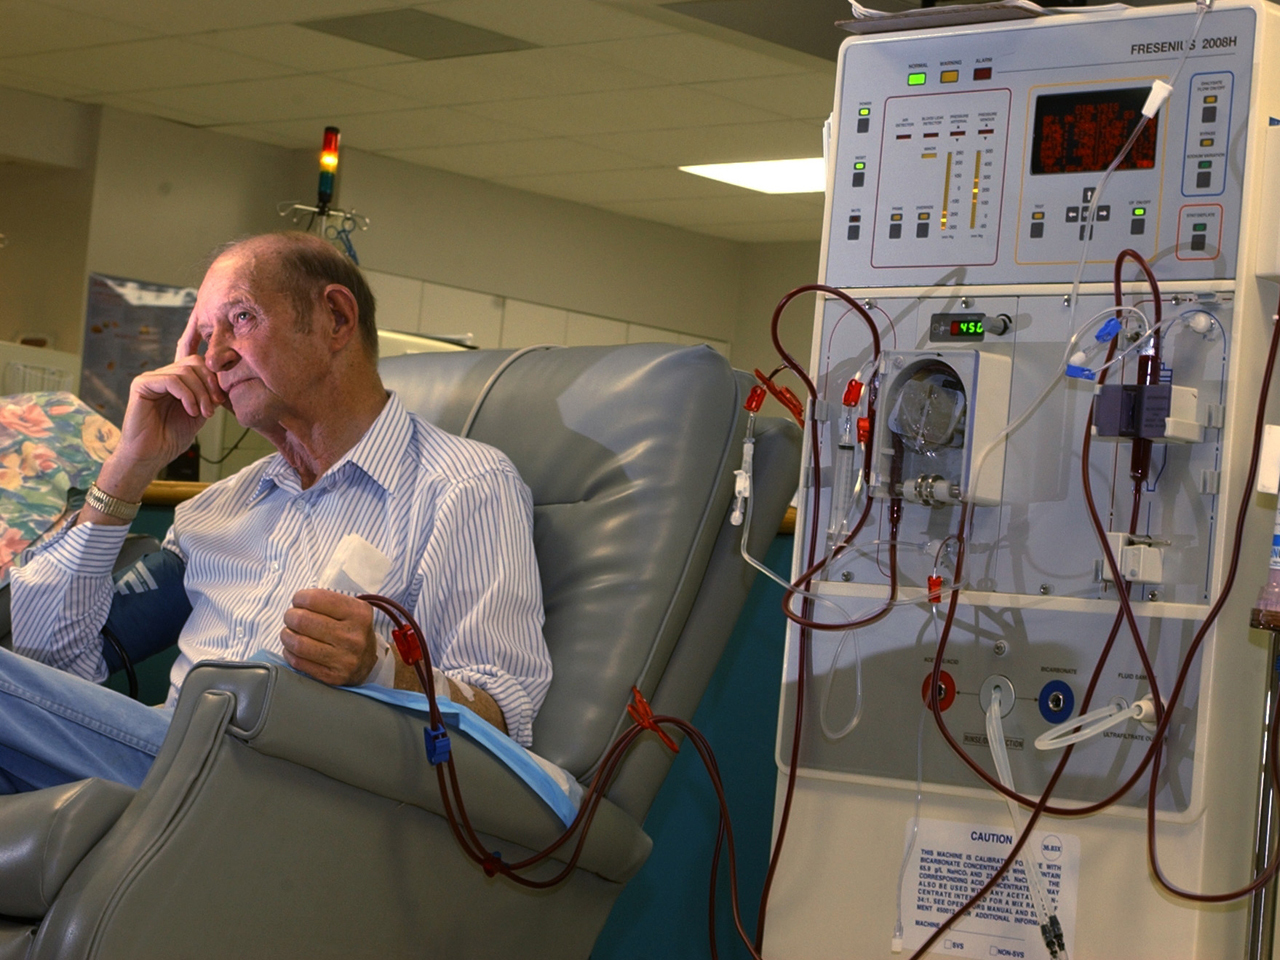 Elderly man in recliner hooked up to a dialysis machine